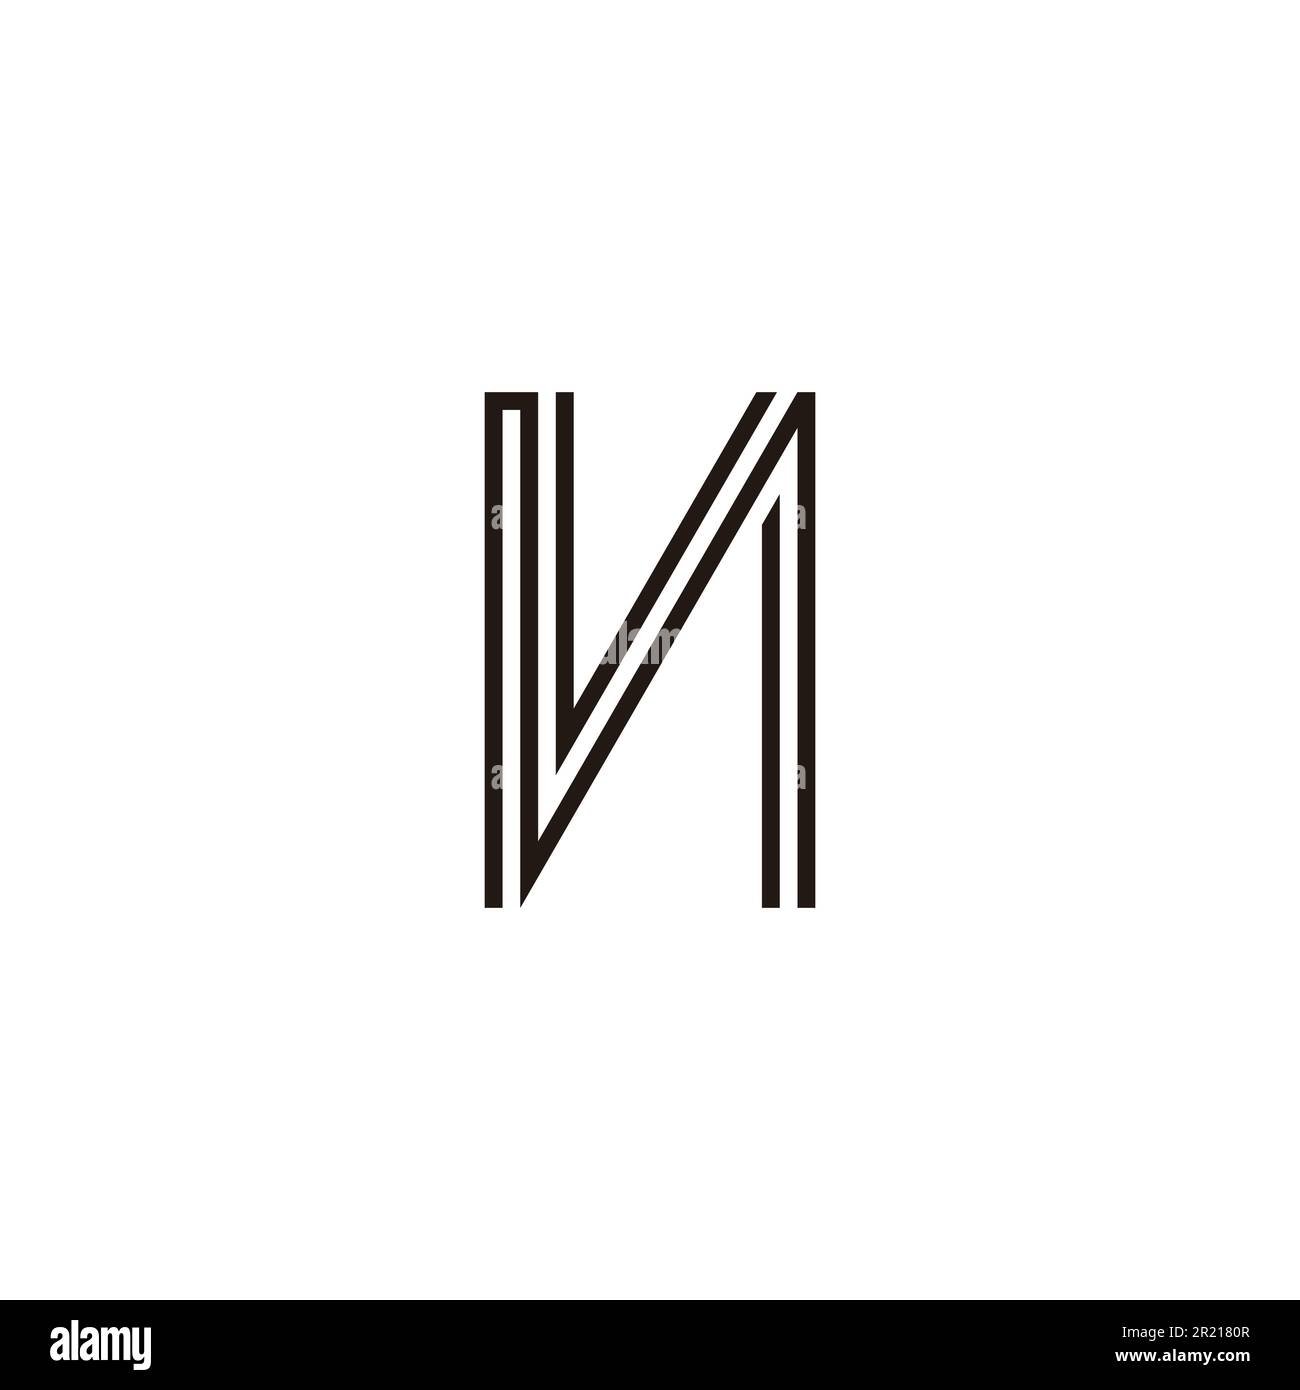 Letter M and v lines geometric symbol simple logo vector Stock Vector